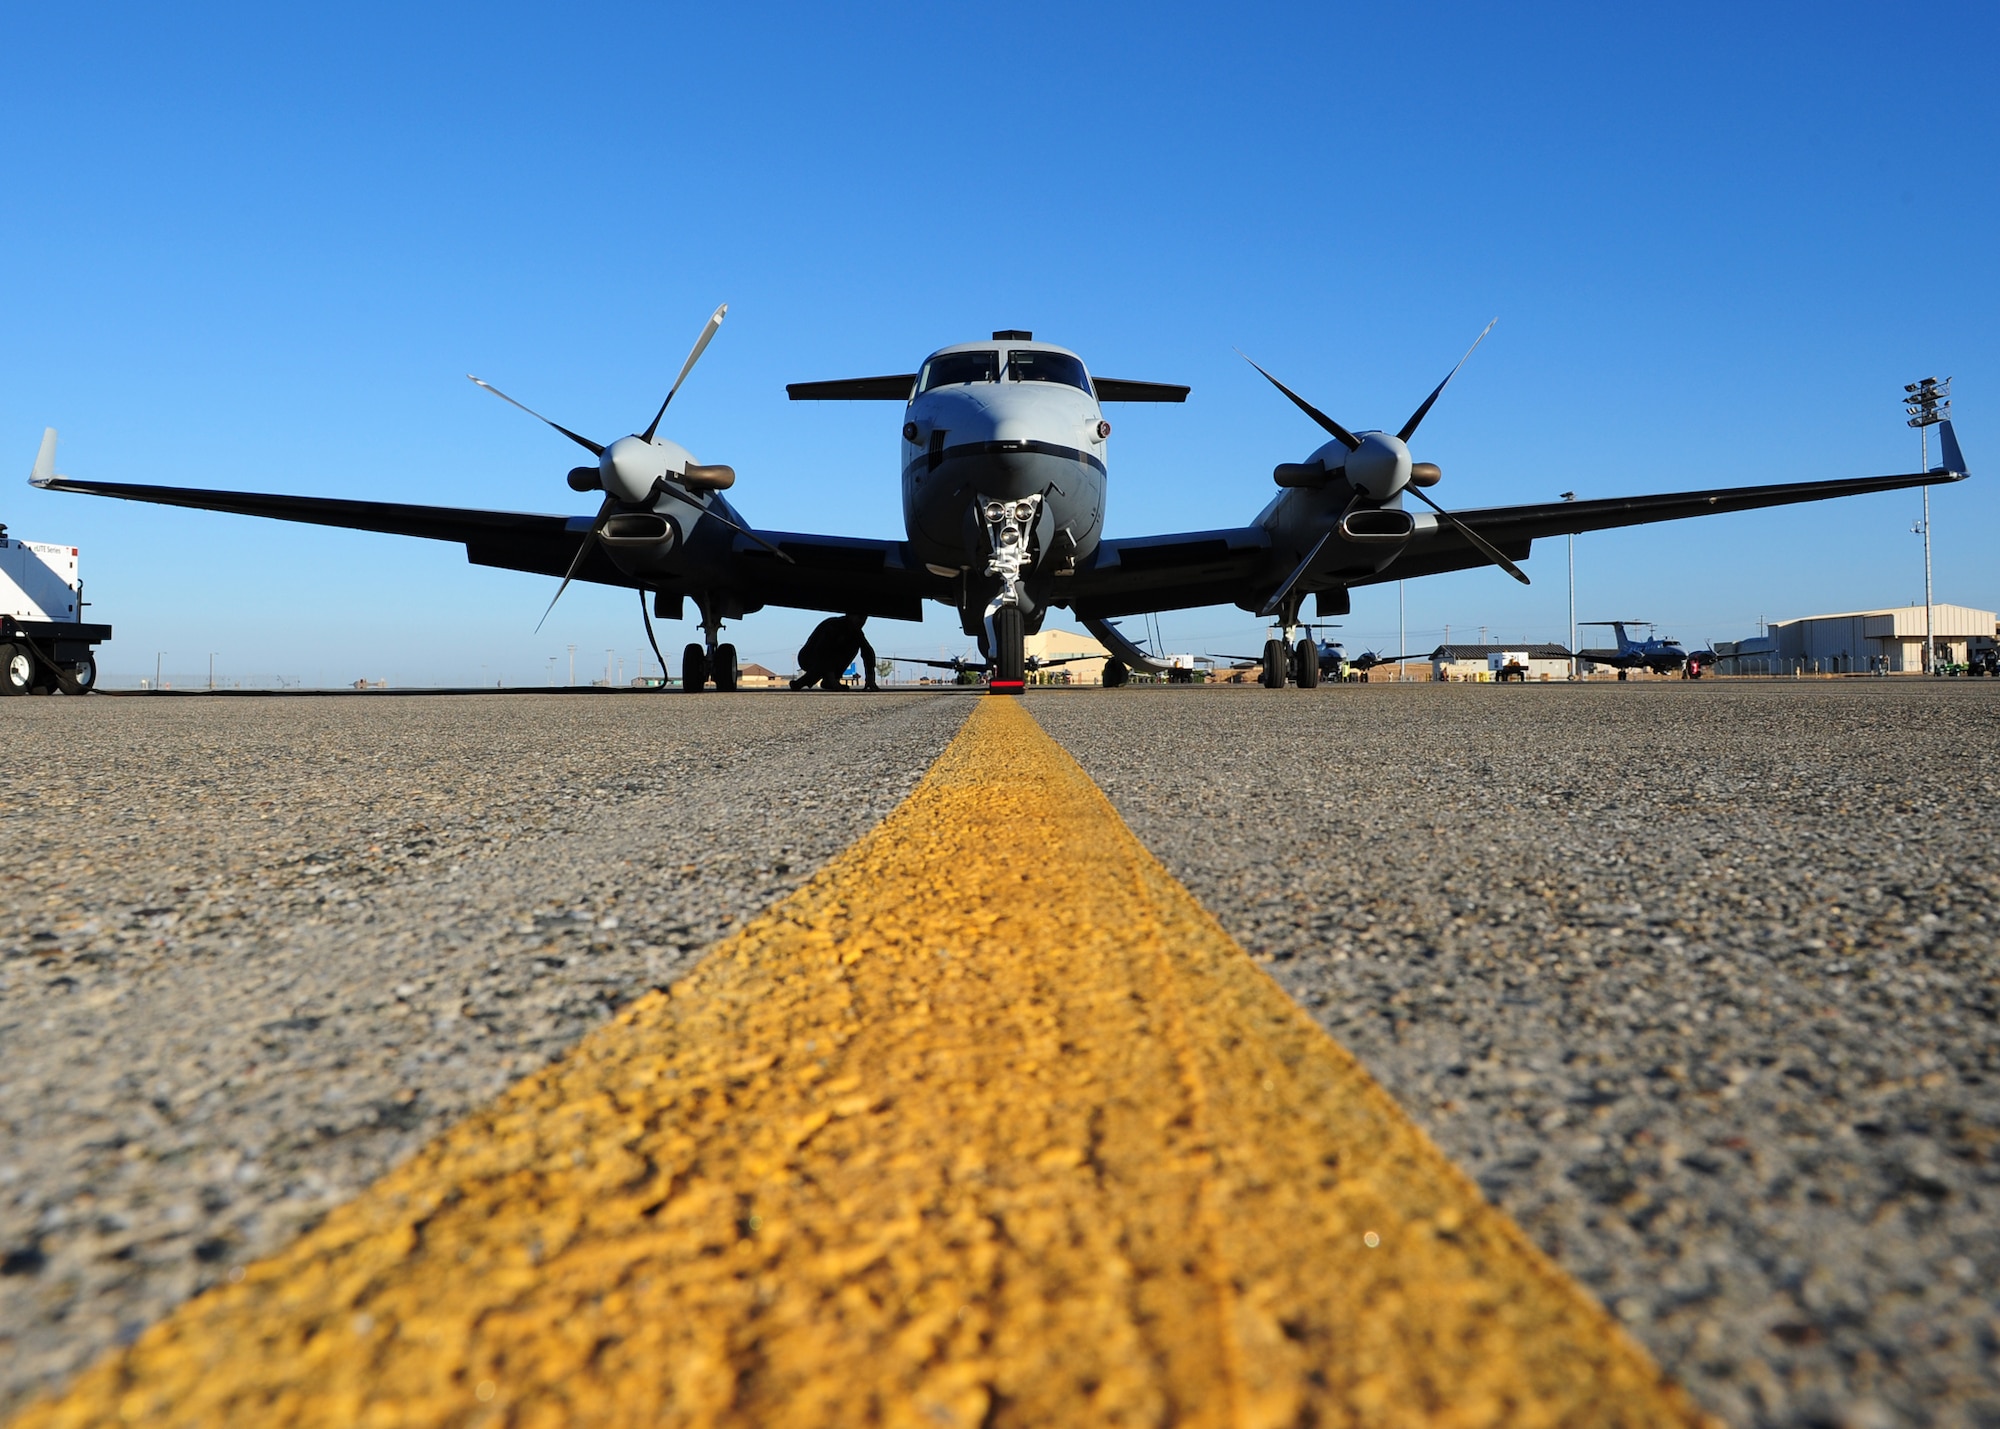 A pilot is shadowed by the wing of an Air Force MC-12W Liberty intelligence, surveillance, and reconnaissance aircraft on the Beale Air Force Base flight line Oct. 9, 2012. The MC-12W is a medium altitude, twin-engine, turboprop aircraft loaded with high tech optical and sensor equipment. (U.S. Air Force photo by Senior Airman Shawn Nickel/Released)